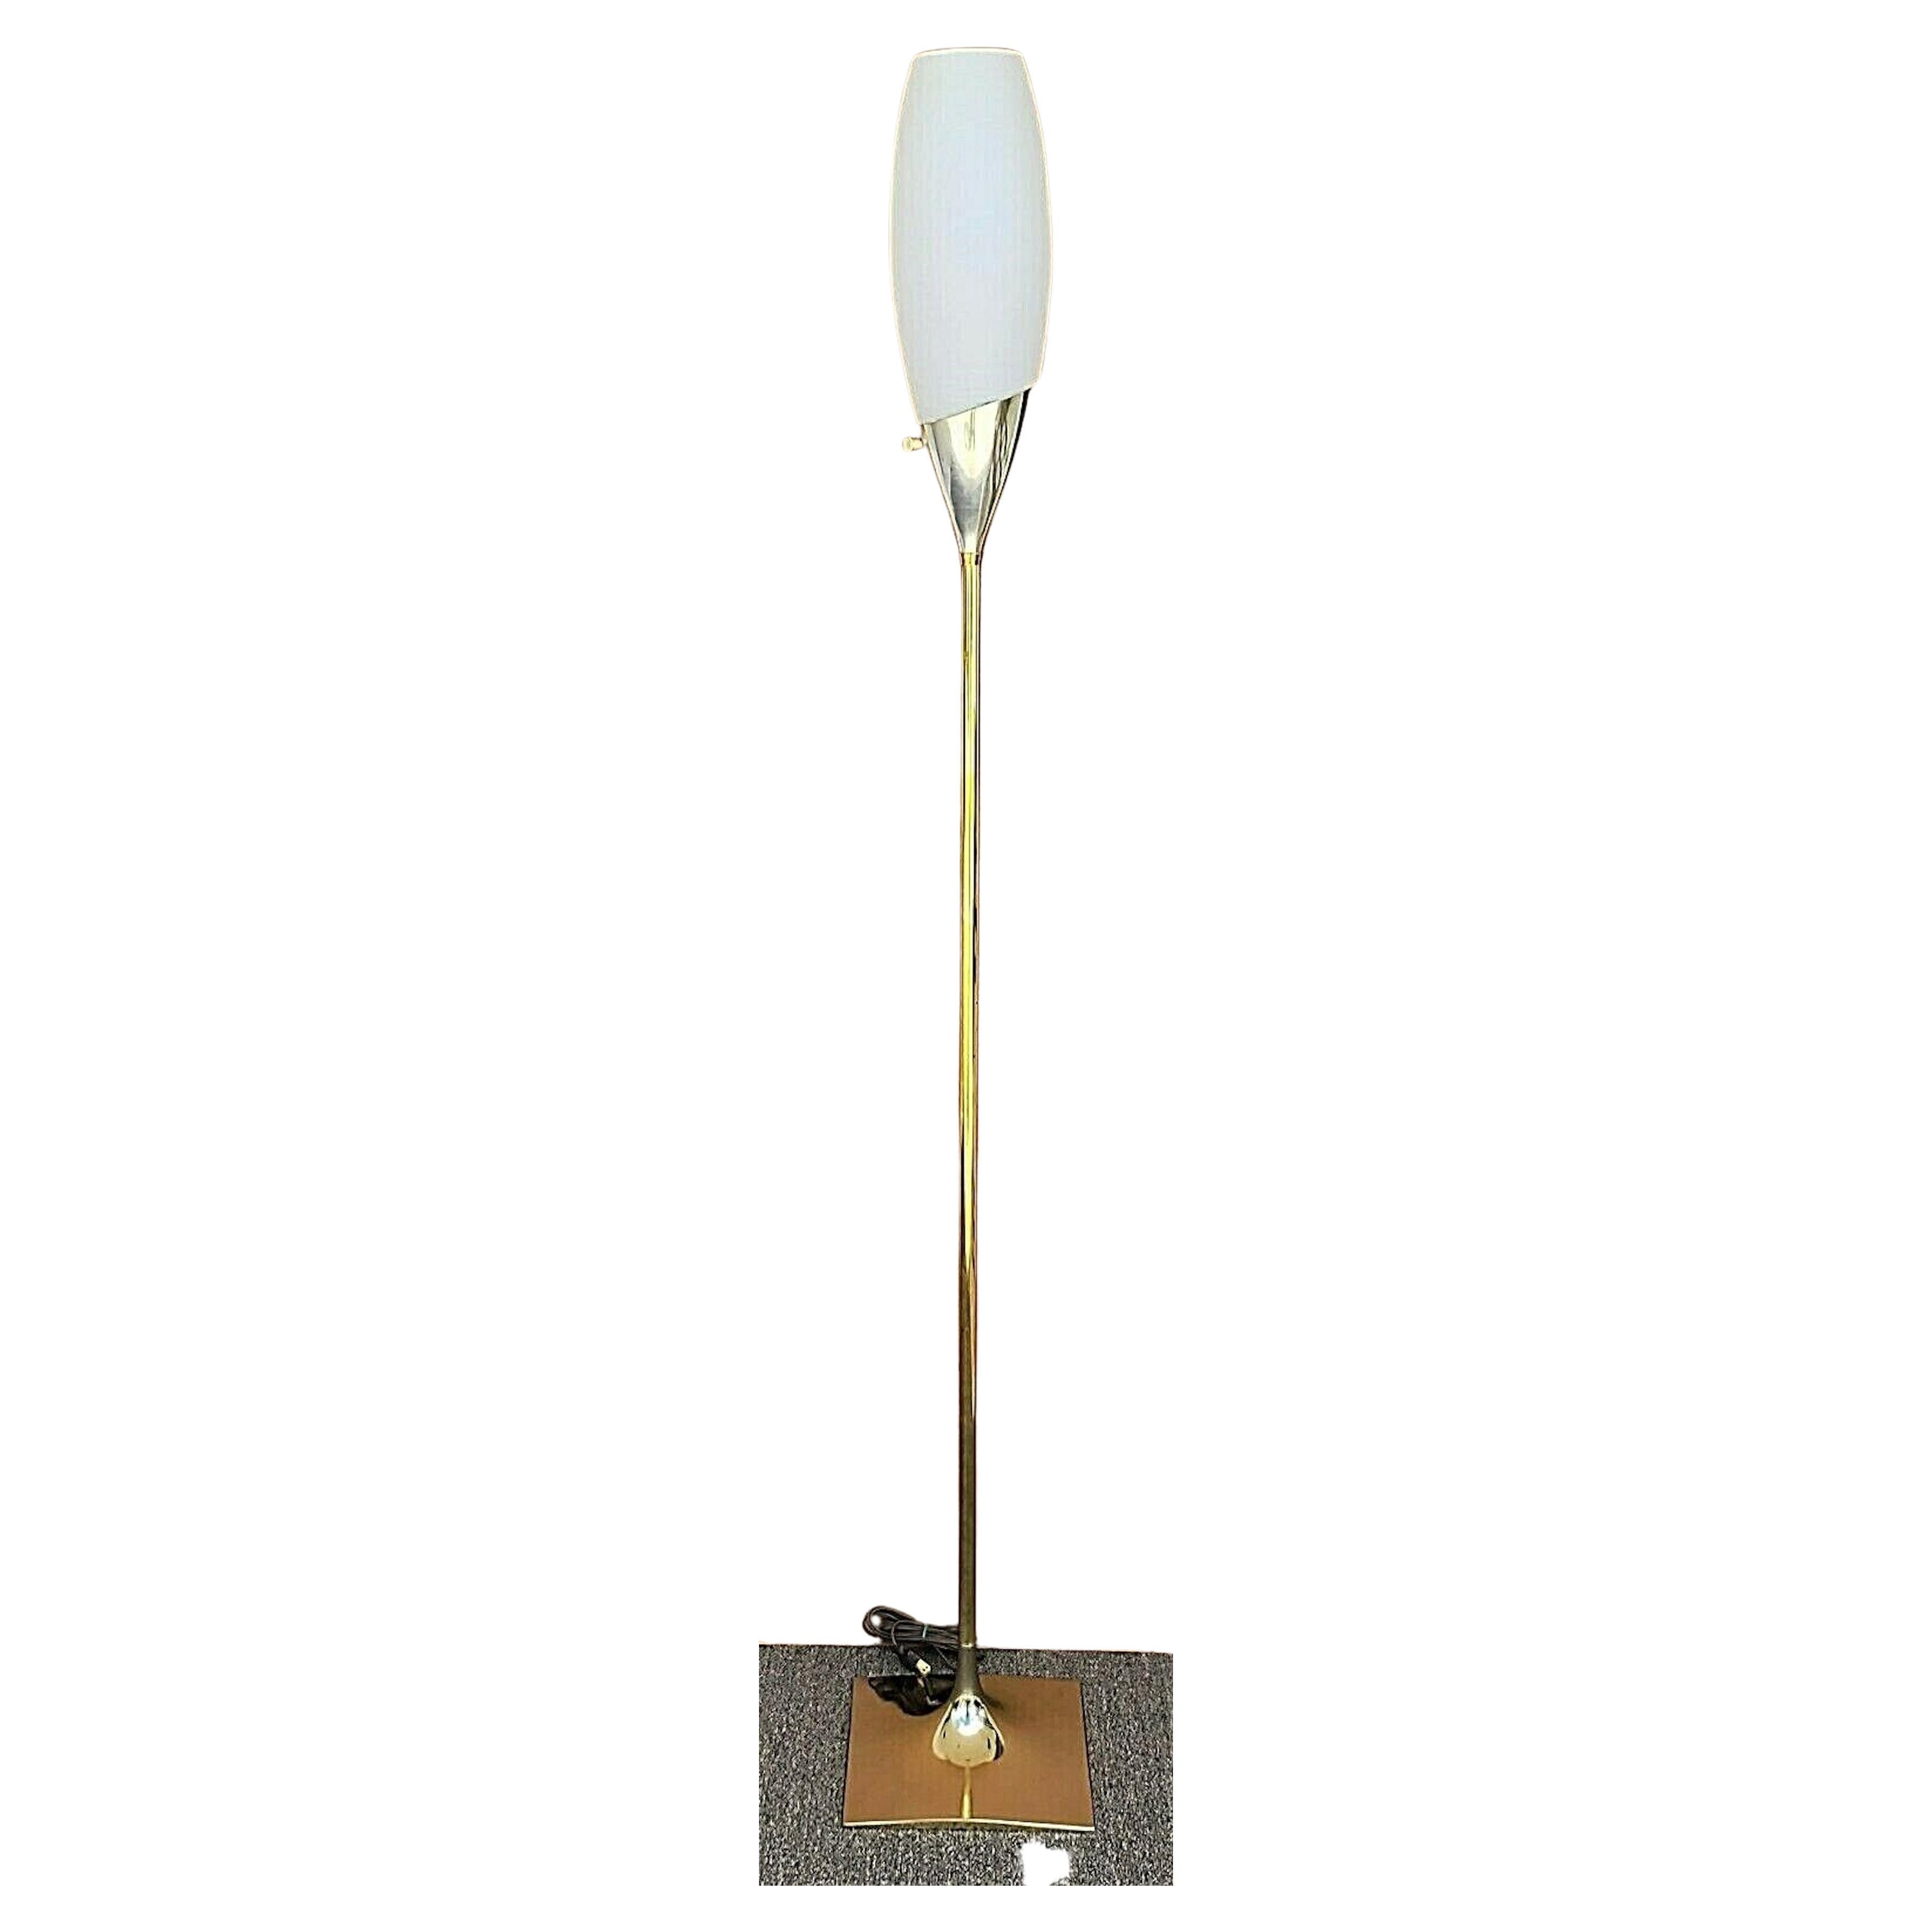 For FULL item description click on CONTINUE READING at the bottom of this page.

Offering One Of Our Recent Palm Beach Estate Fine Lighting Acquisitions Of A
Vintage 1960's Laurel Lamp Co Tulip Glass & Brass Floor Lamp by GERALD